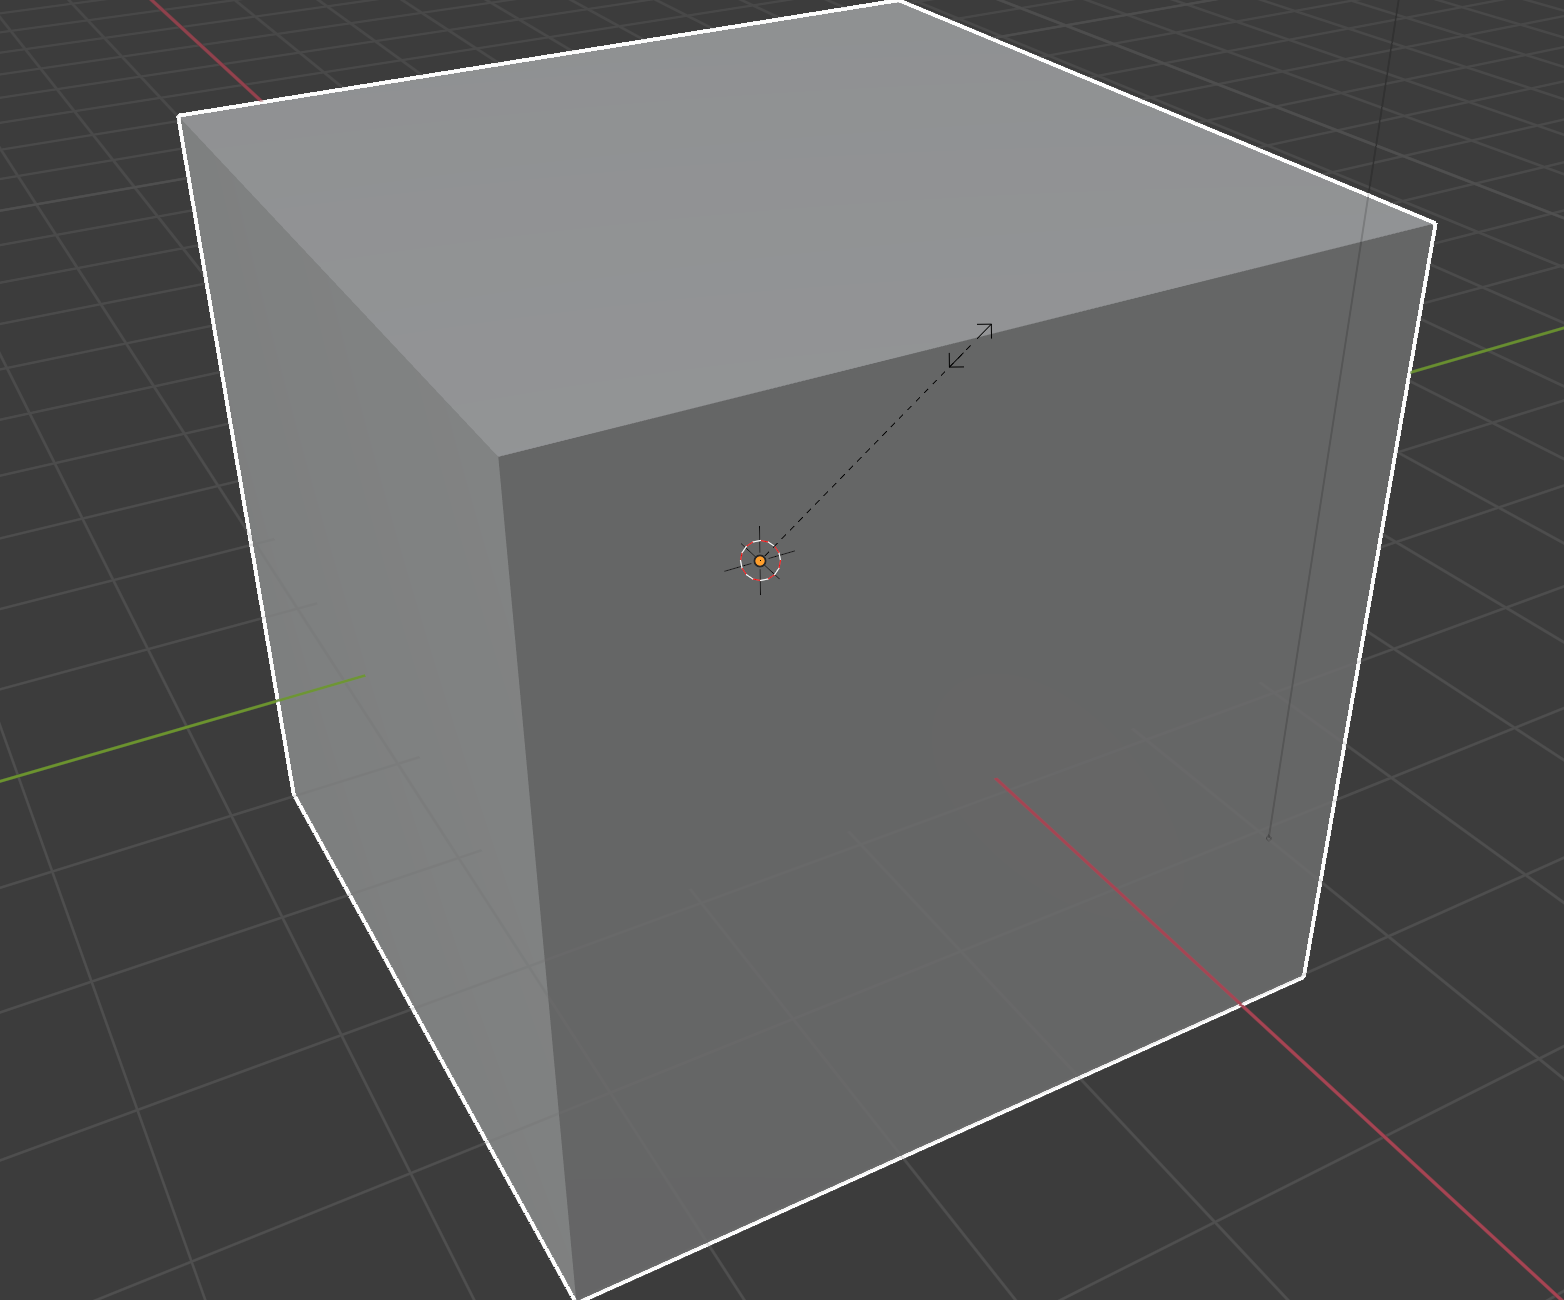 Scaling with Blender